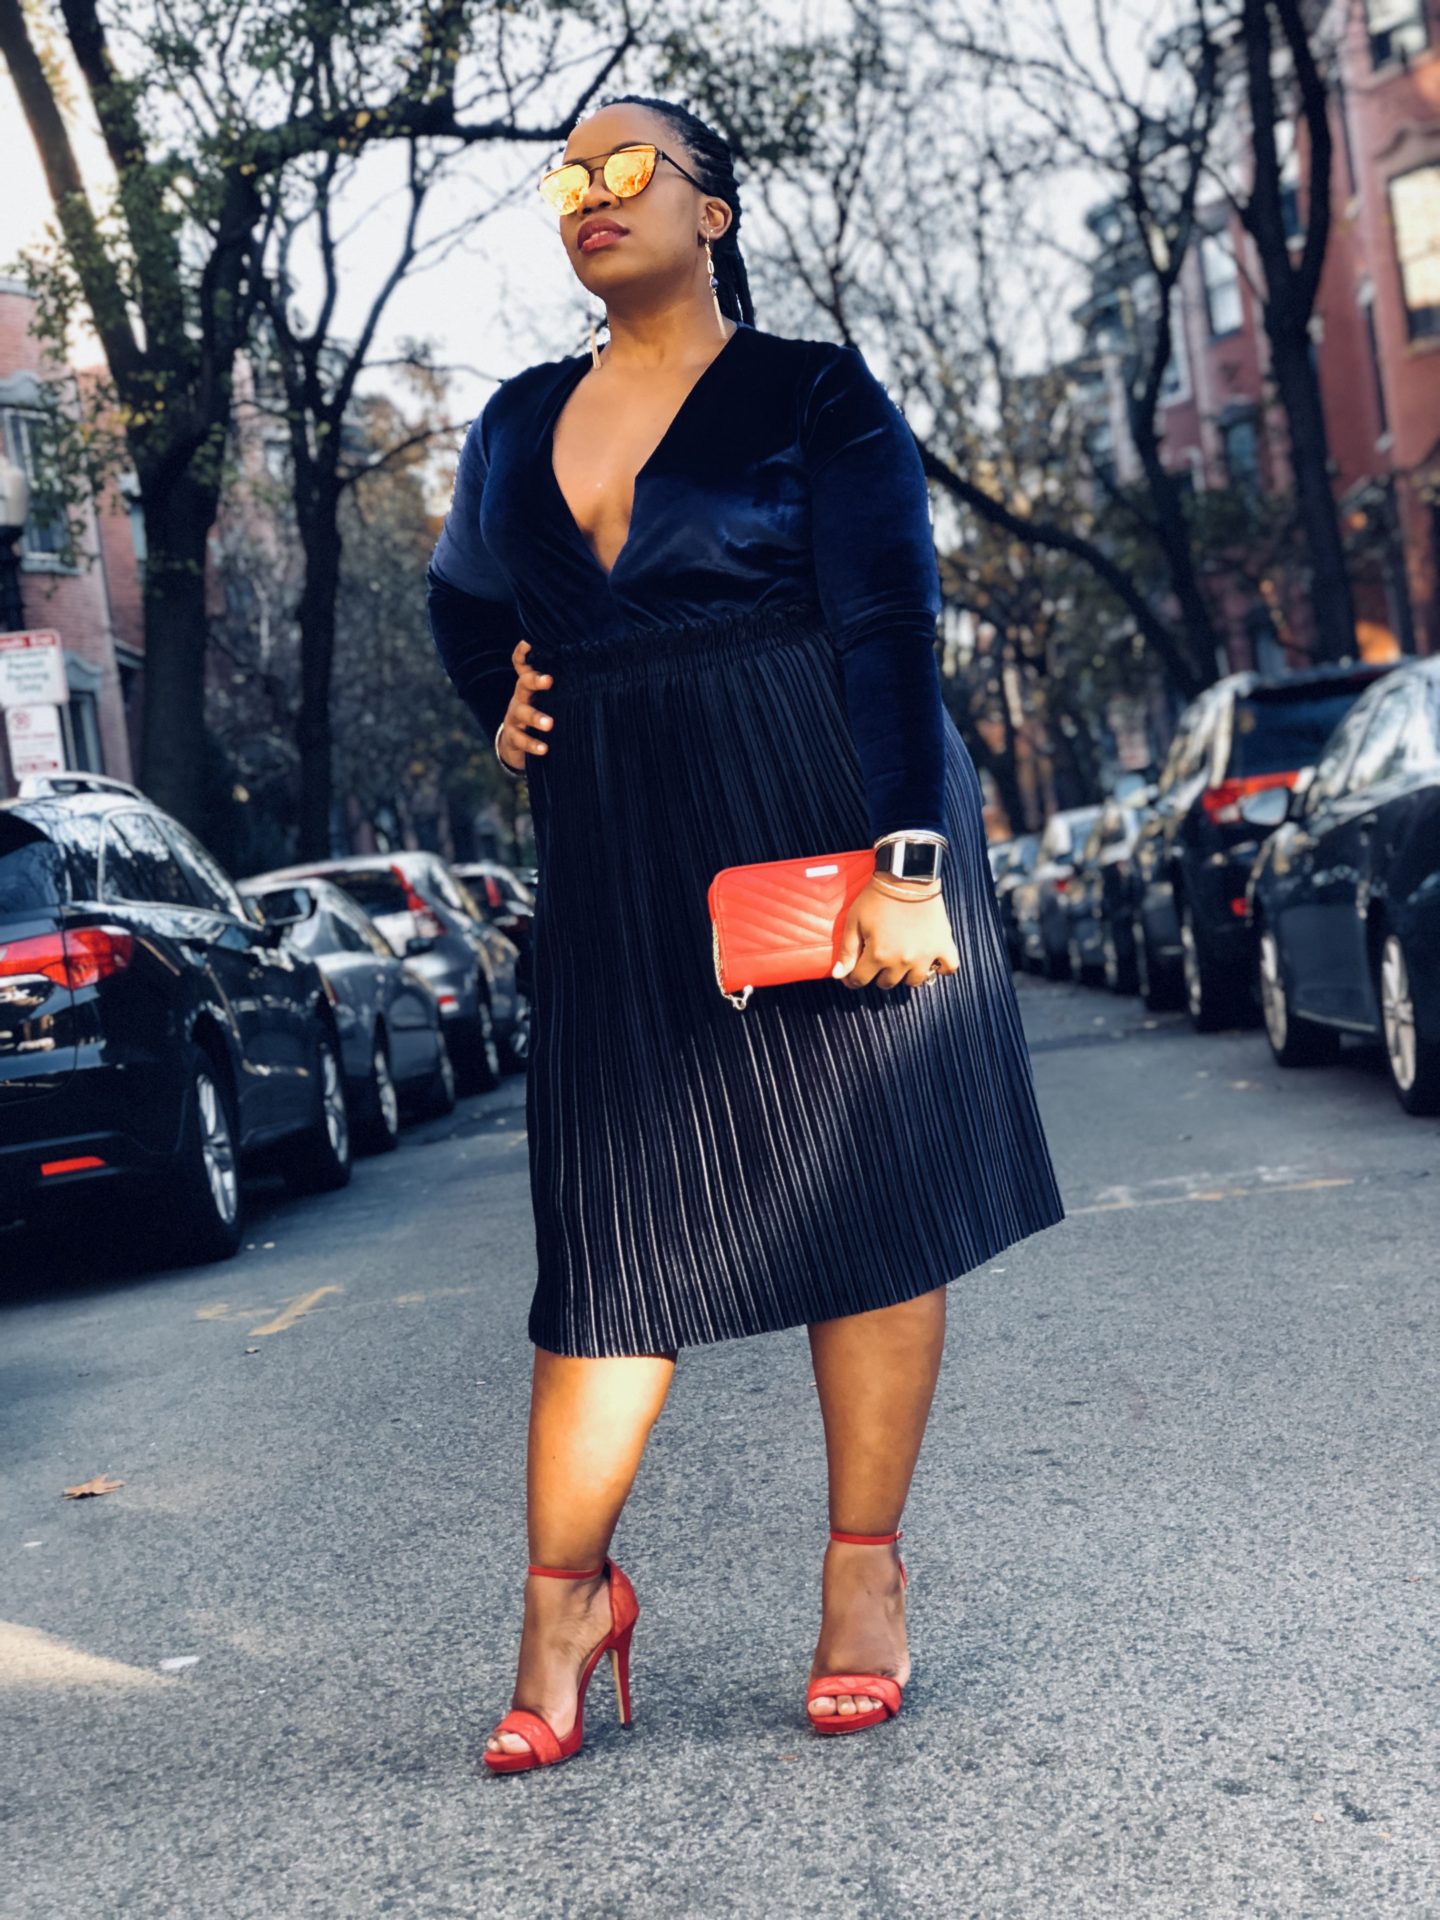 African blogger, Africancocktail, African cocktail, African, African woman, African Bloggers, Boston Blogger, New England Blogger, Charlotte Russe, Curvy Woman, Curvy Blogger, Curvy Girl, Primark, Make it your own, Velvet